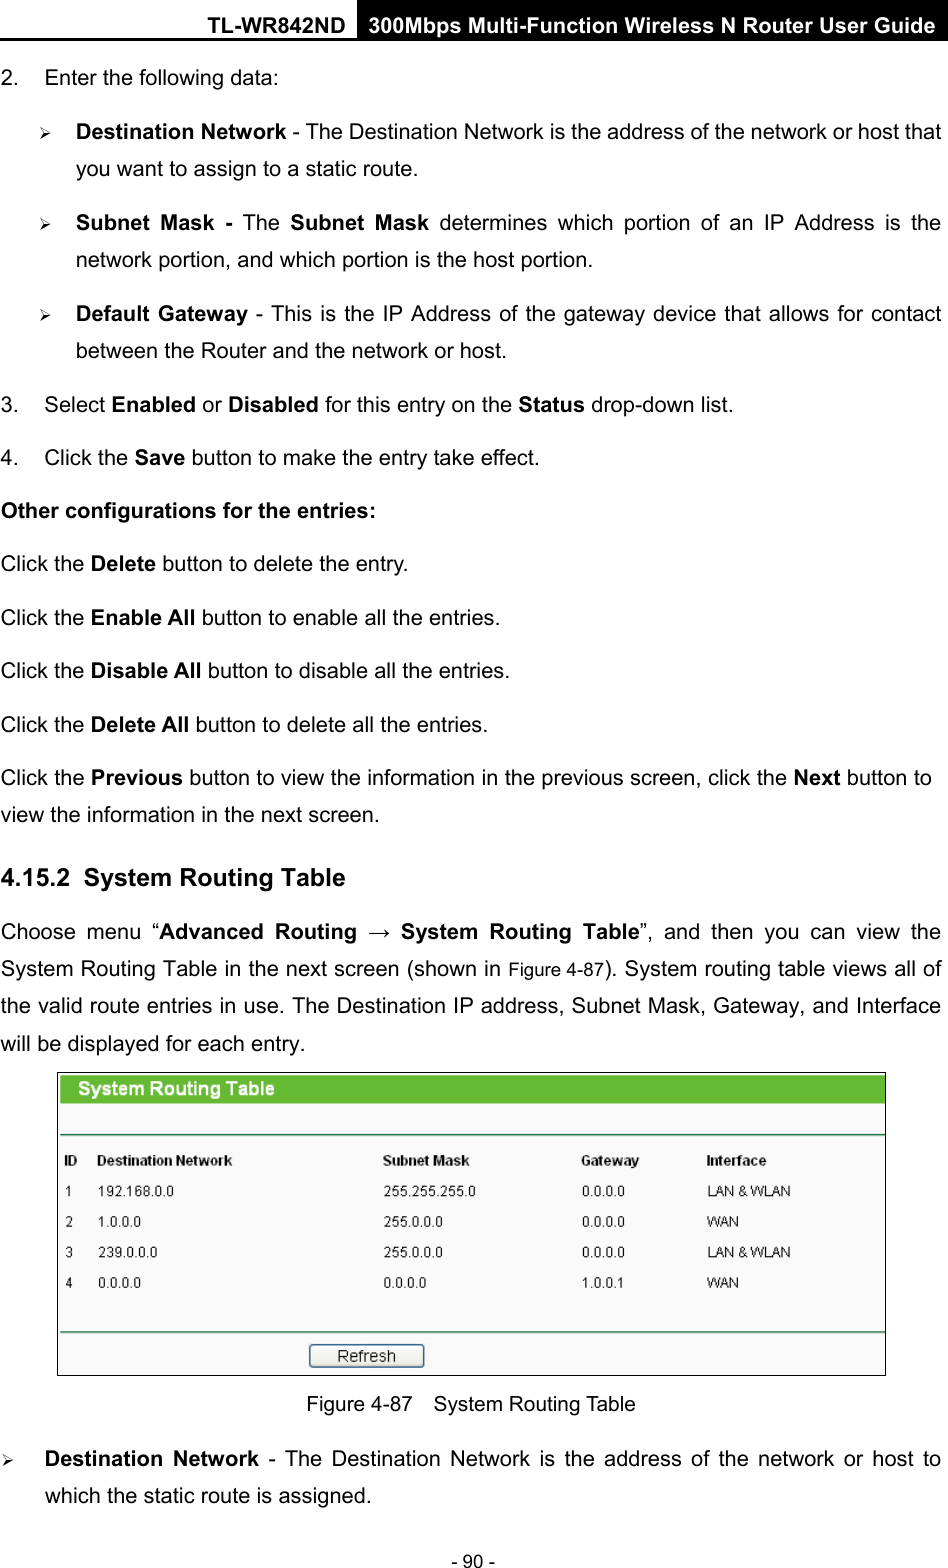 TL-WR842ND 300Mbps Multi-Function Wireless N Router User Guide  - 90 - 2. Enter the following data:  Destination Network - The Destination Network is the address of the network or host that you want to assign to a static route.  Subnet Mask - The  Subnet Mask determines which portion of an IP Address is the network portion, and which portion is the host portion.  Default Gateway - This is the IP Address of the gateway device that allows for contact between the Router and the network or host. 3. Select Enabled or Disabled for this entry on the Status drop-down list. 4. Click the Save button to make the entry take effect. Other configurations for the entries: Click the Delete button to delete the entry. Click the Enable All button to enable all the entries. Click the Disable All button to disable all the entries. Click the Delete All button to delete all the entries. Click the Previous button to view the information in the previous screen, click the Next button to view the information in the next screen. 4.15.2  System Routing Table Choose menu “Advanced Routing →  System Routing Table”,  and then you can view the System Routing Table in the next screen (shown in Figure 4-87). System routing table views all of the valid route entries in use. The Destination IP address, Subnet Mask, Gateway, and Interface will be displayed for each entry.  Figure 4-87  System Routing Table  Destination Network  -  The Destination Network is the address of the network or host to which the static route is assigned.   